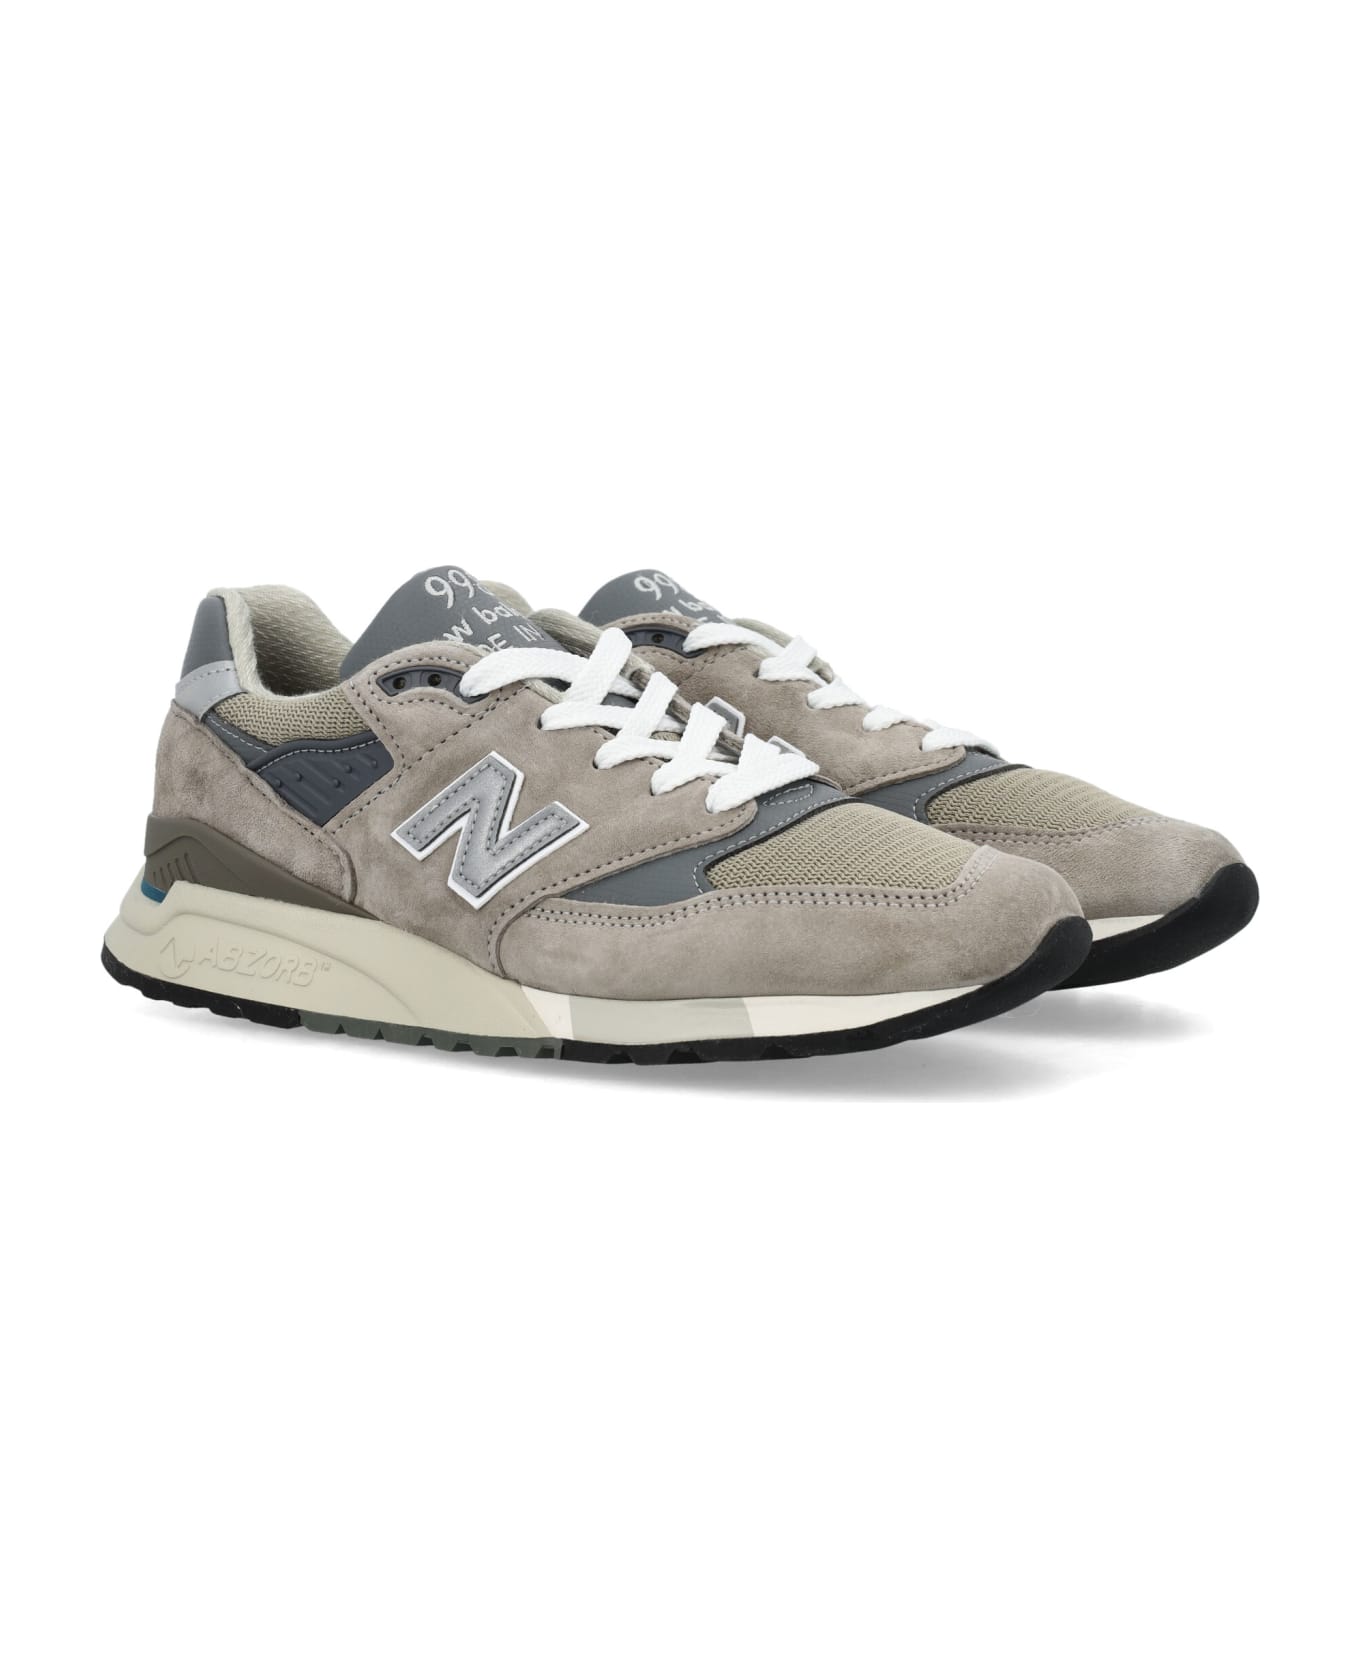 New Balance Made In Usa 998 Core - COOL GREY スニーカー